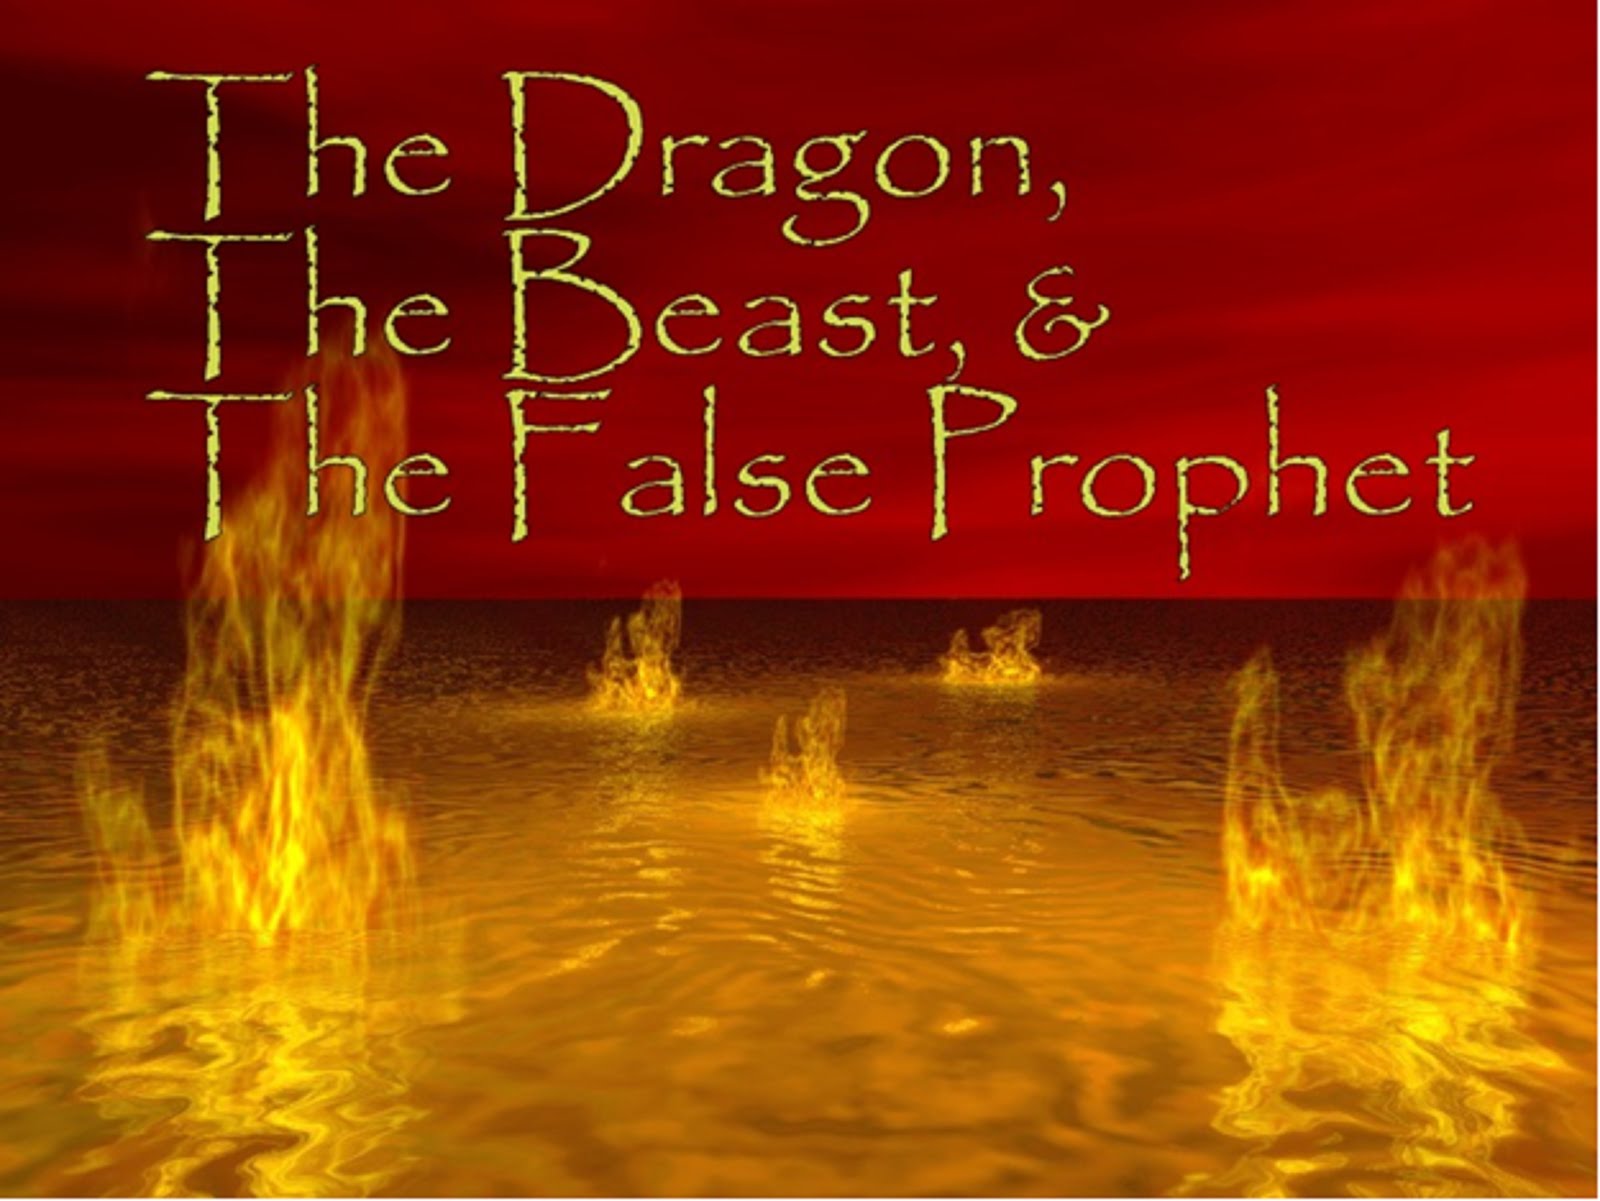 THE DRAGON, THE BEAST AND THE FALSE PROPHET IN THE LAKE OF FIRE